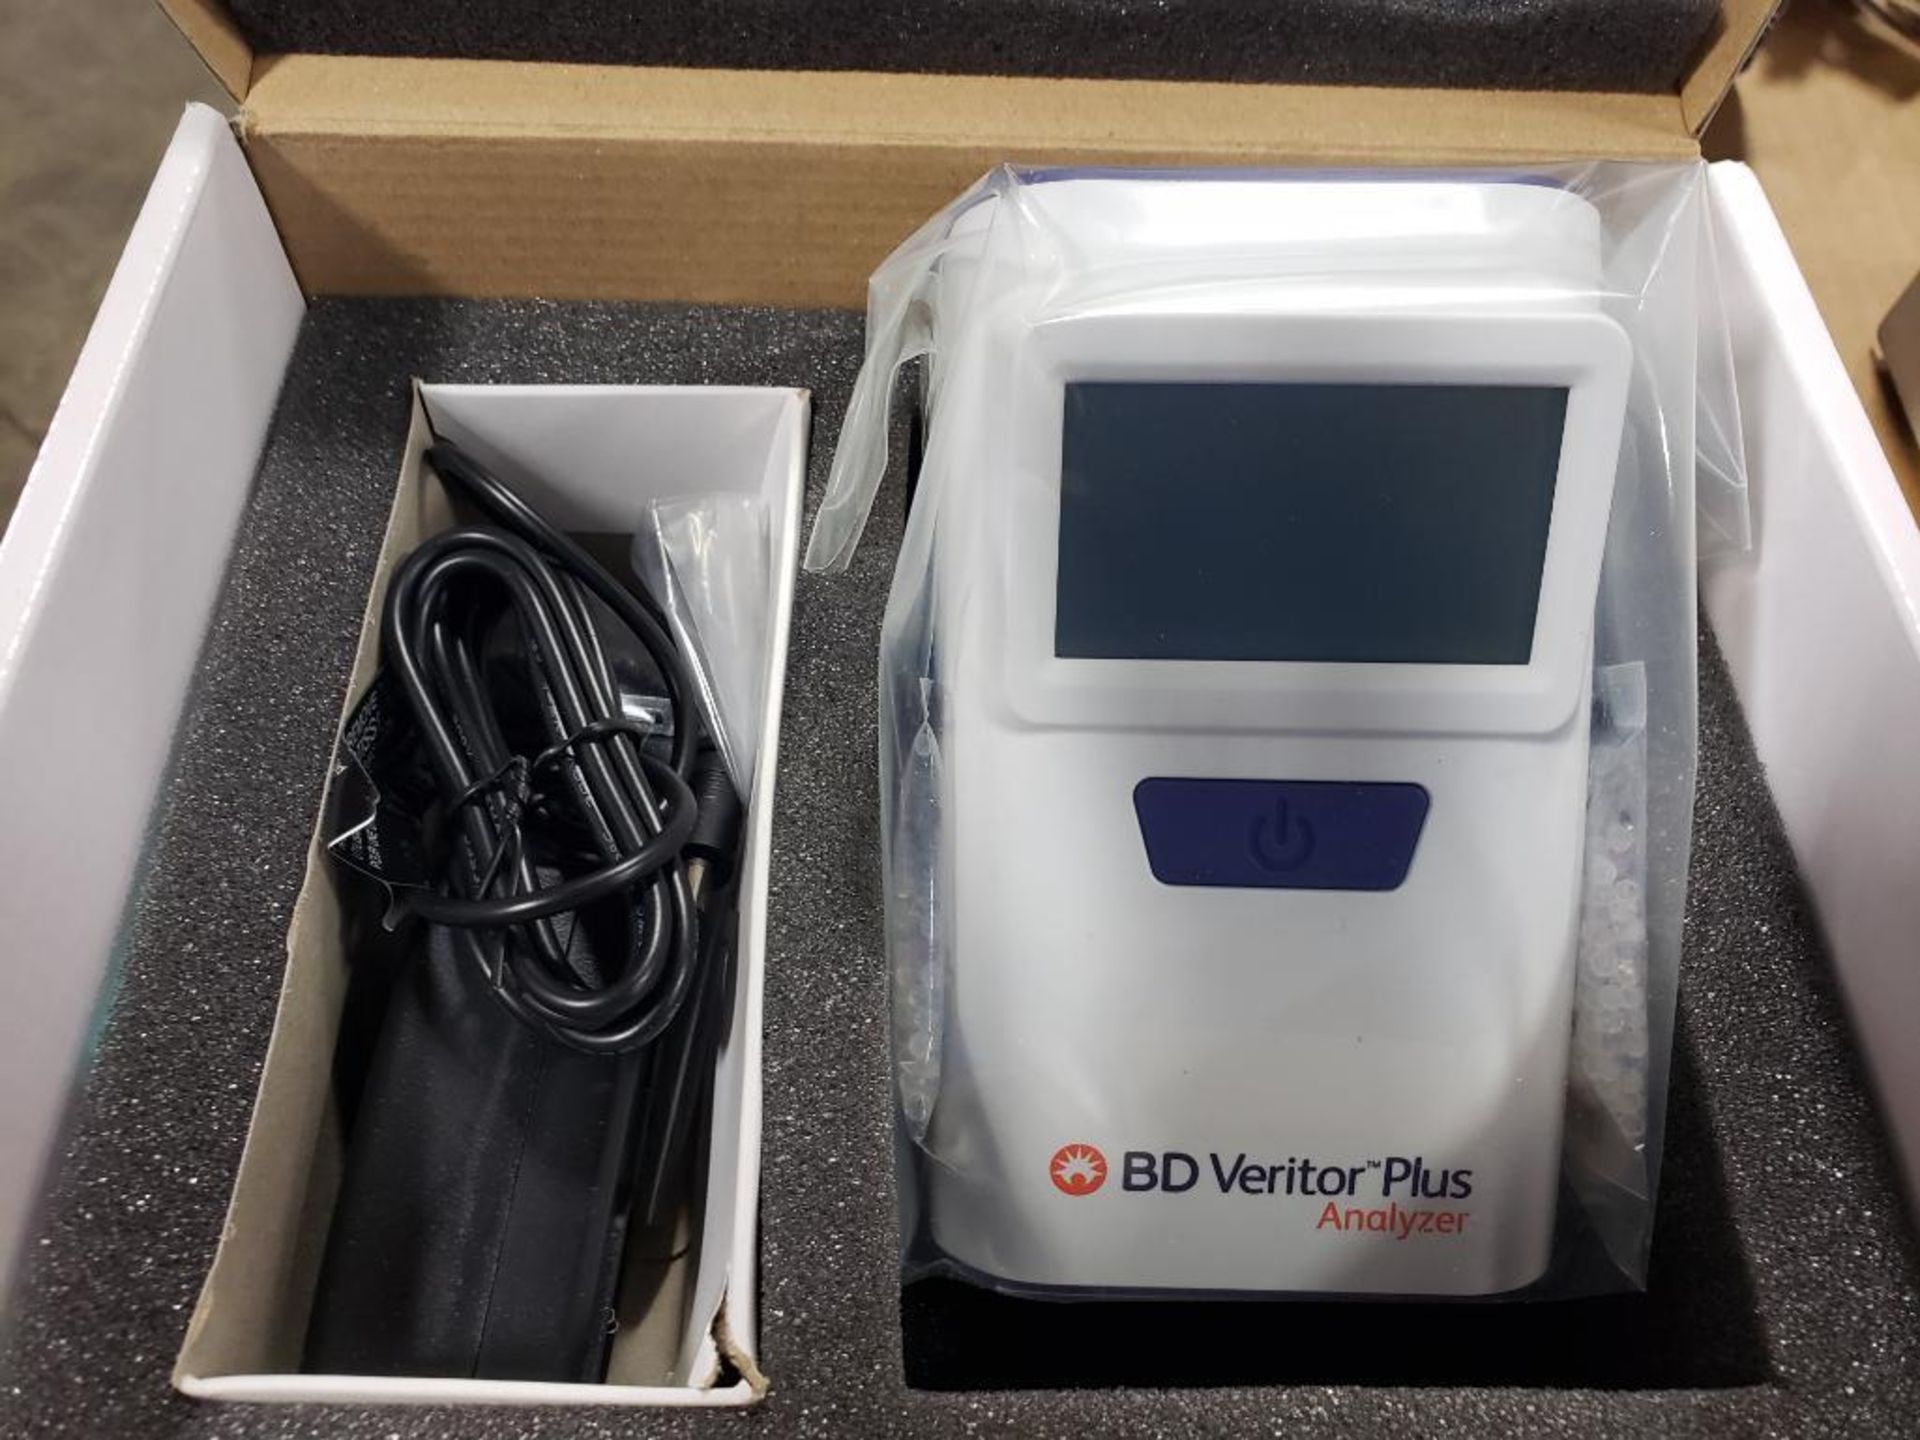 BD Veritor Plus analyzer. Appears new in box. - Image 2 of 7